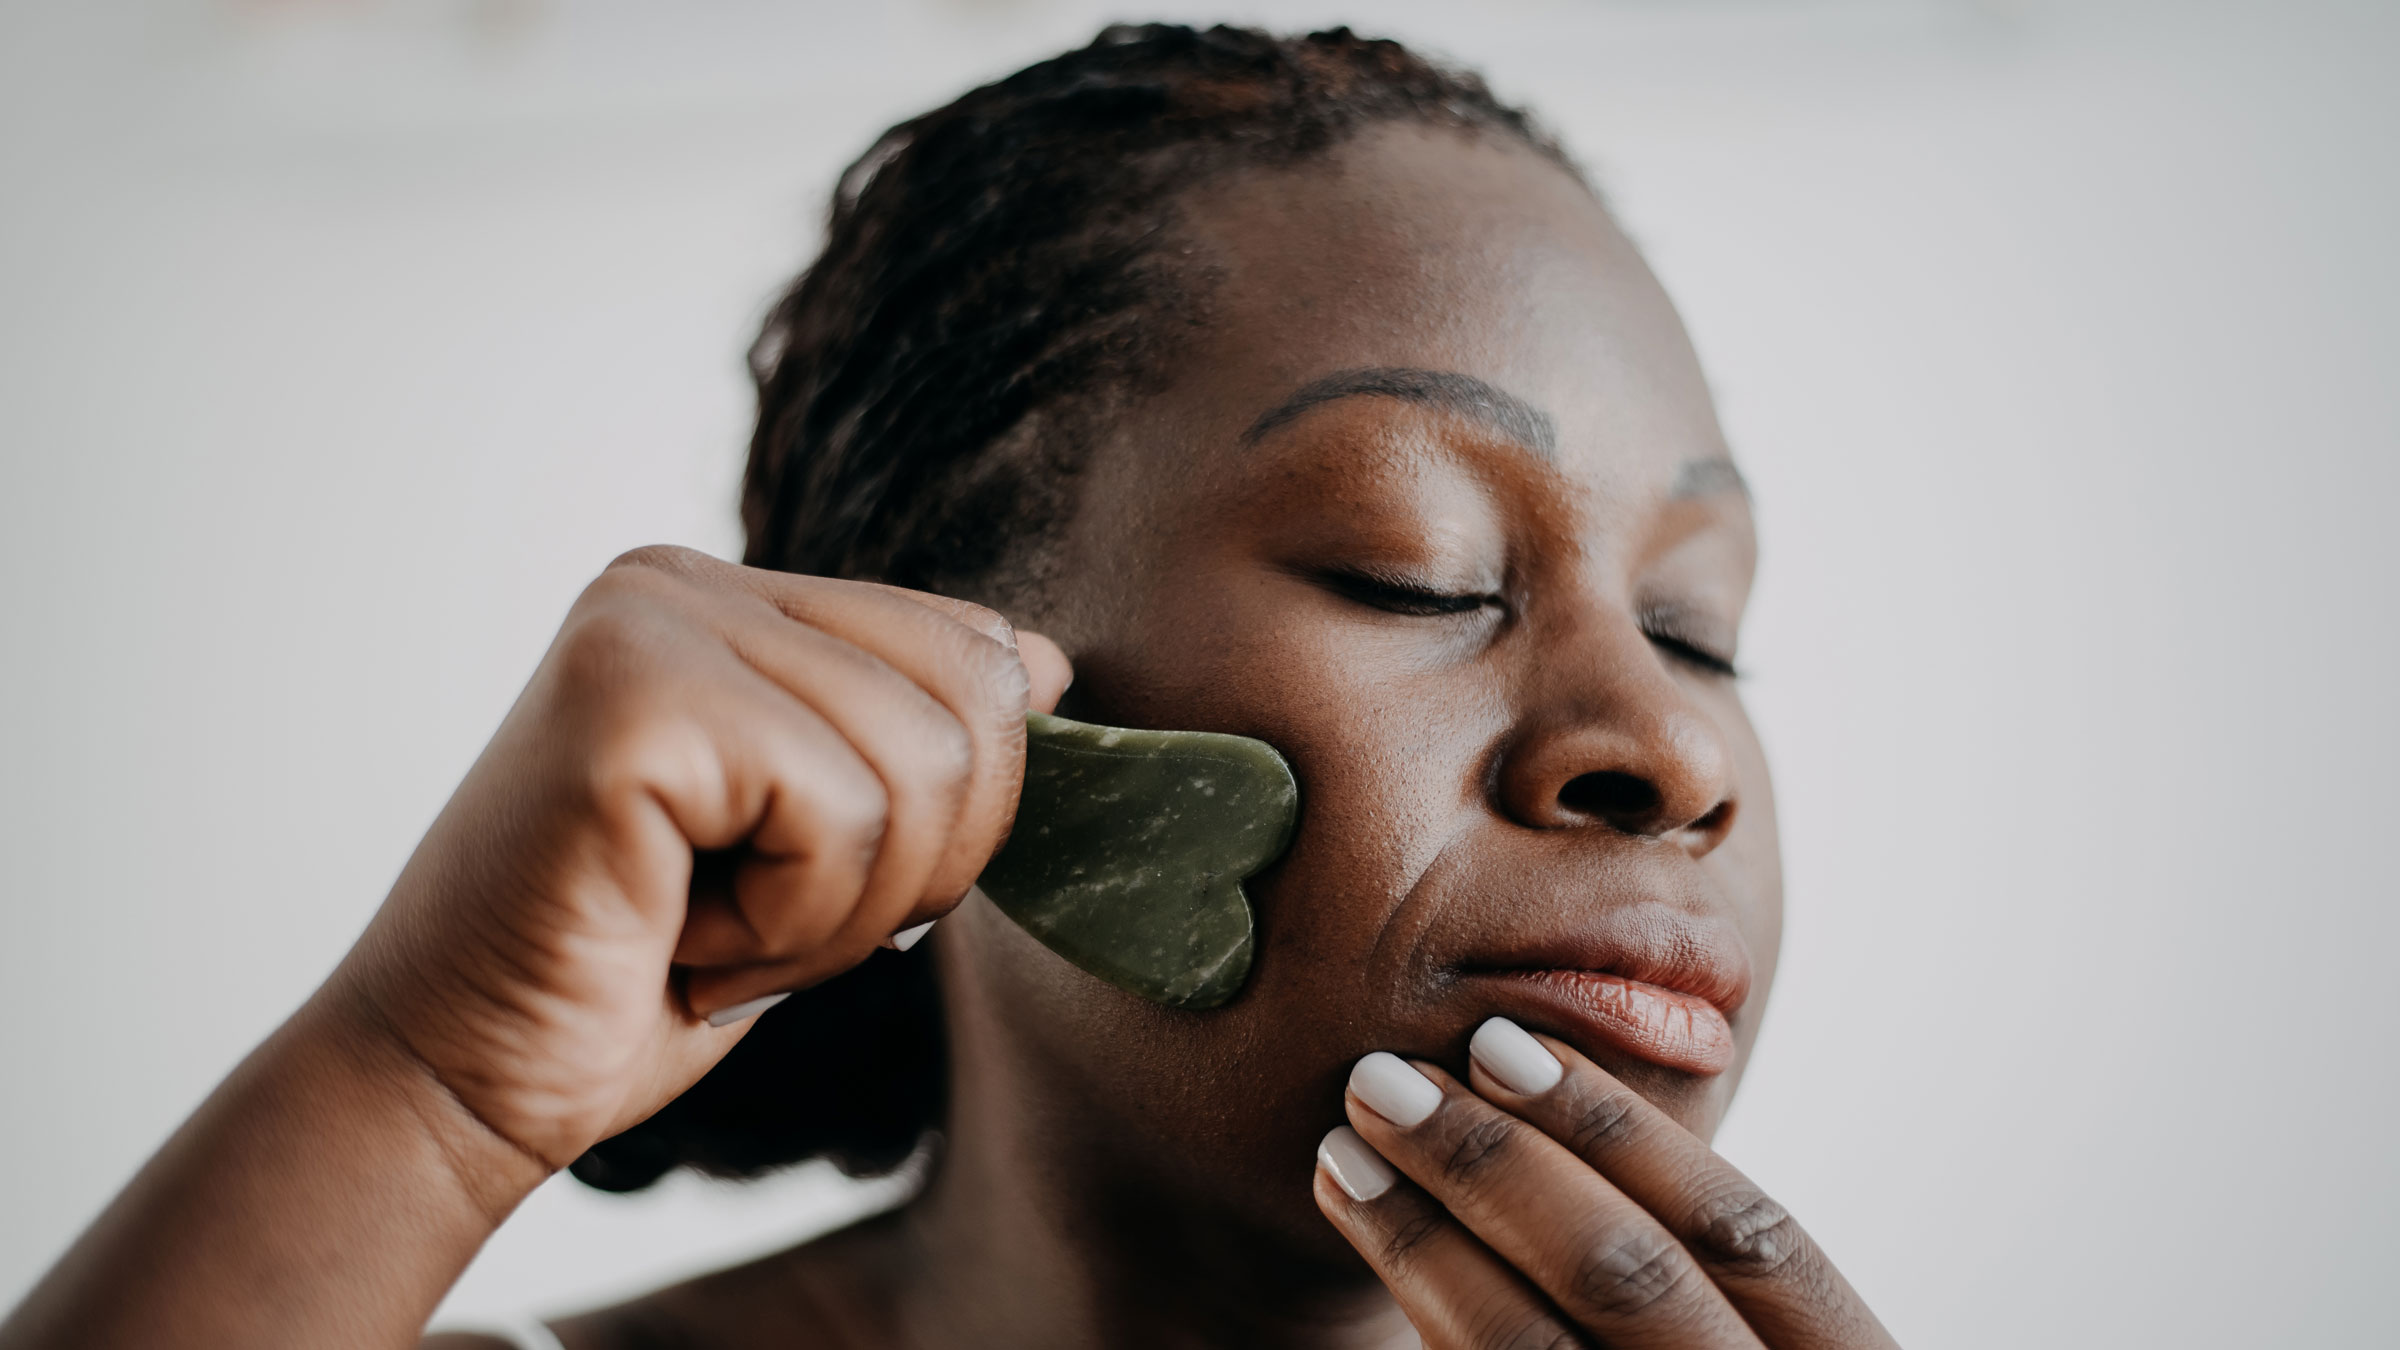 Gua Sha: How Do You Use It, and What Are the Benefits? - GoodRx